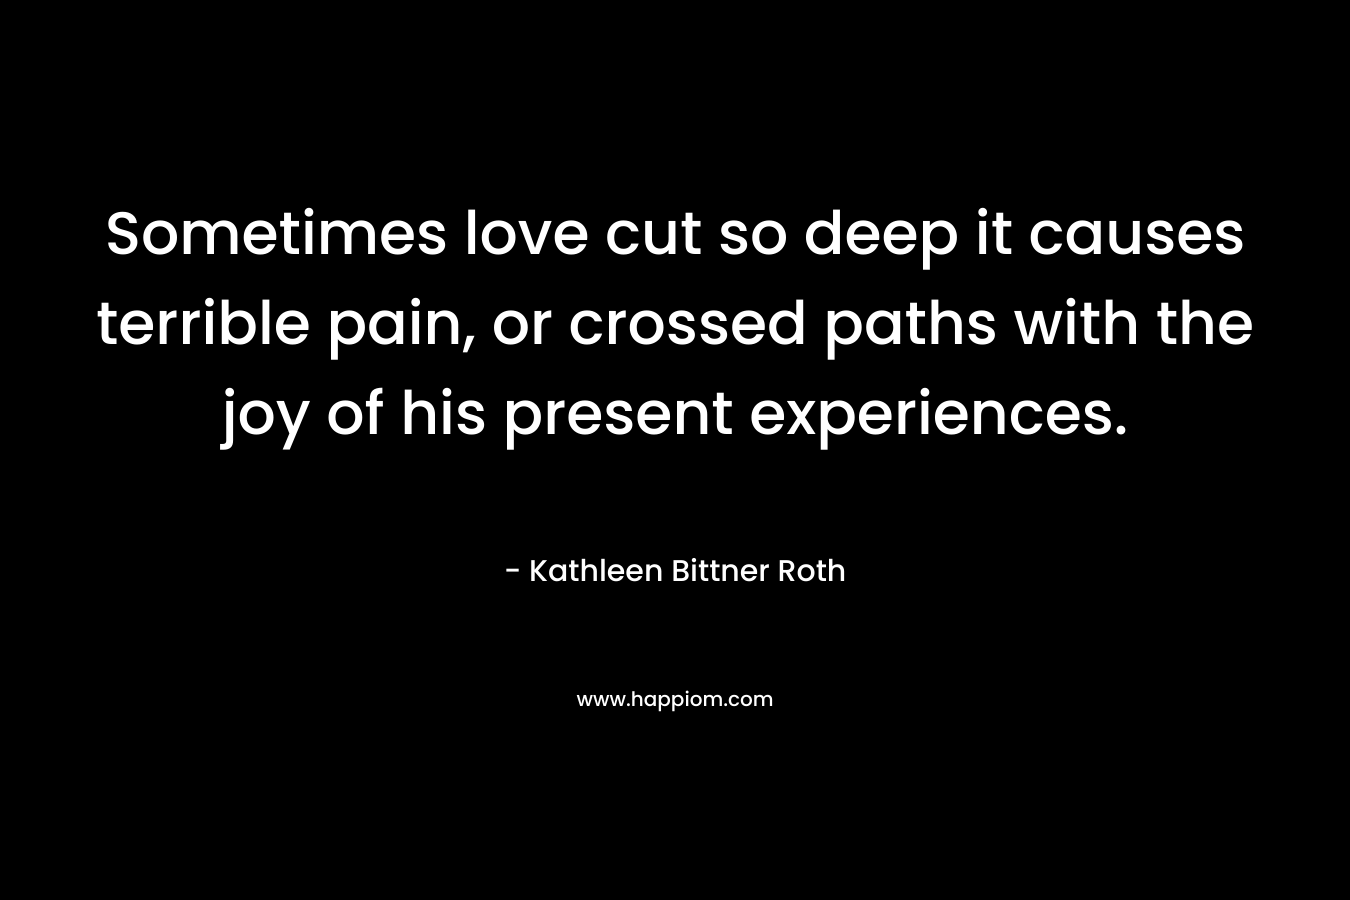 Sometimes love cut so deep it causes terrible pain, or crossed paths with the joy of his present experiences. – Kathleen Bittner Roth